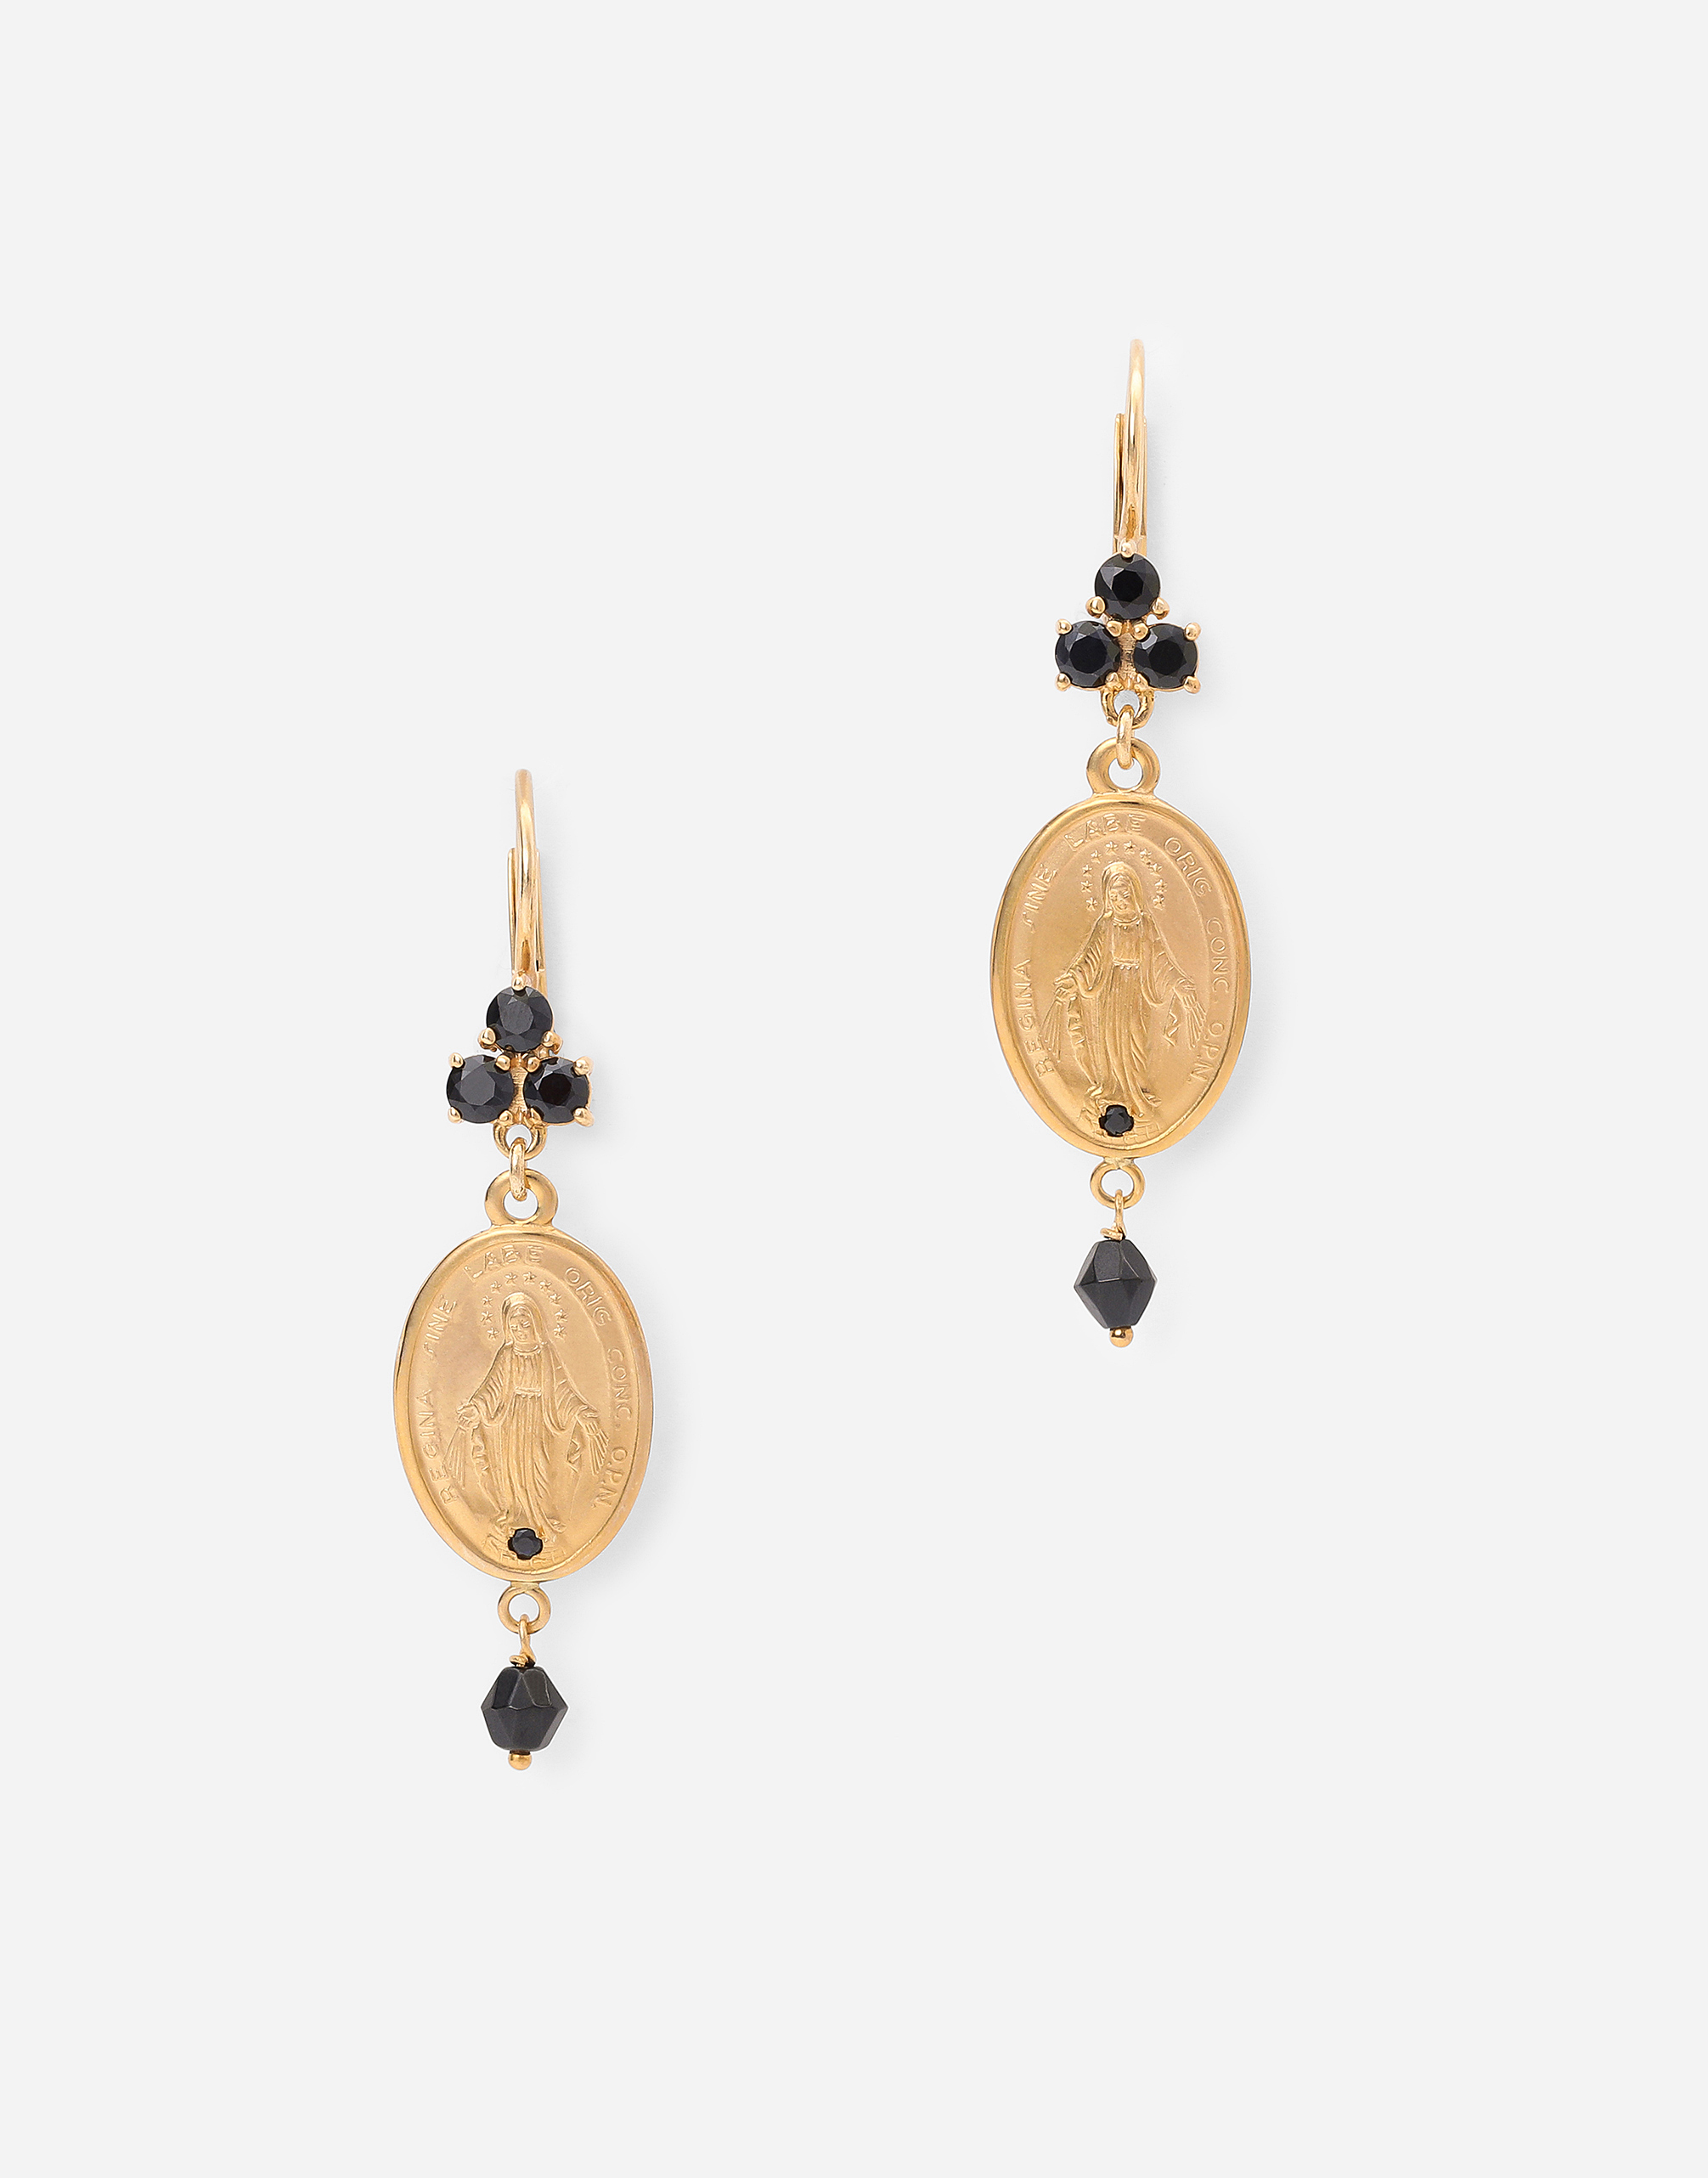 Dolce & Gabbana Tradition Earrings In Yellow 18kt Gold With Medals